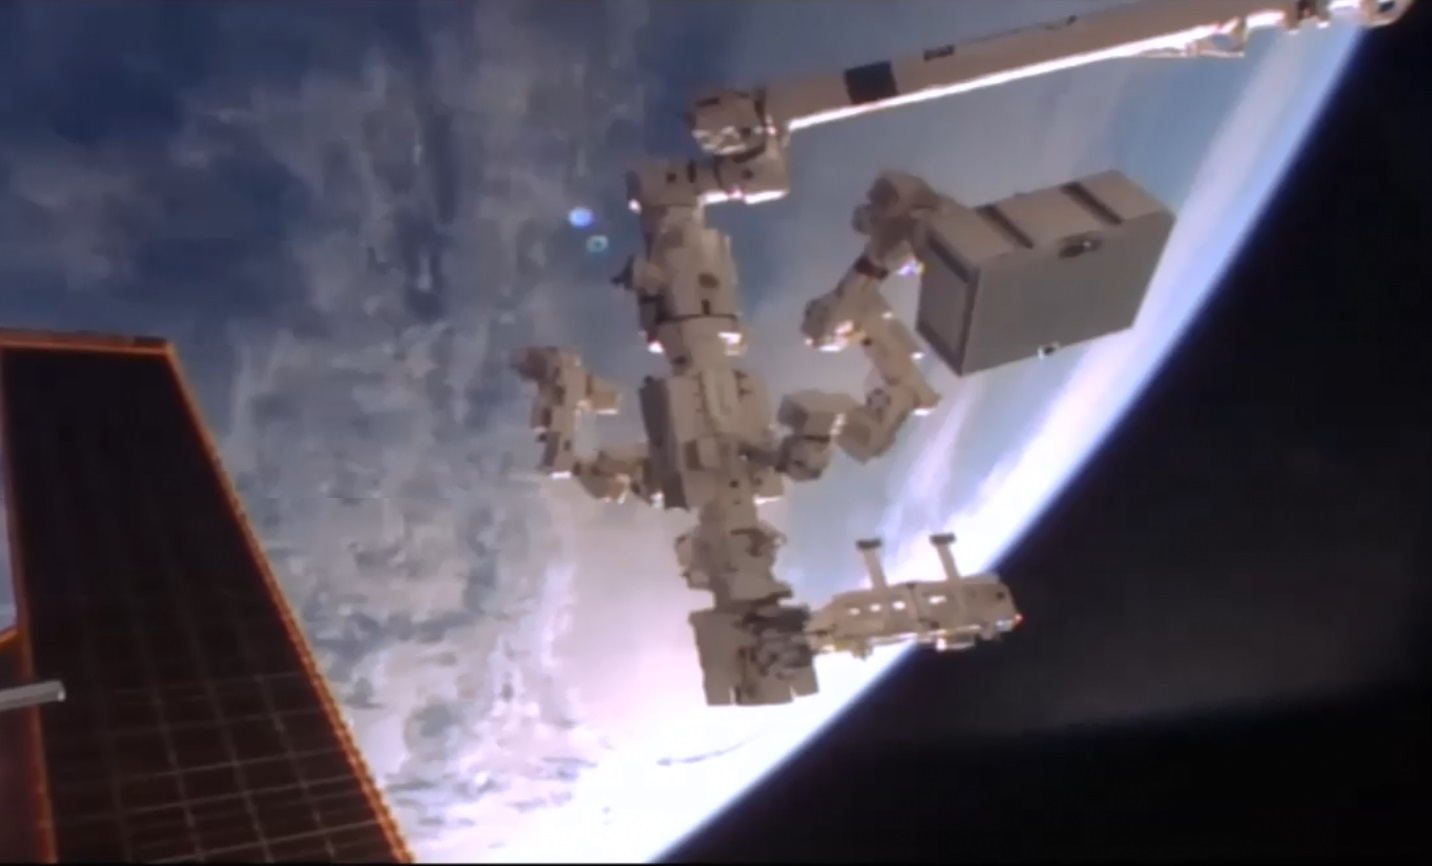 Iss Robots Work Overtime Replacing First Batch Of Batteries Ahead Of Friday Spacewalk